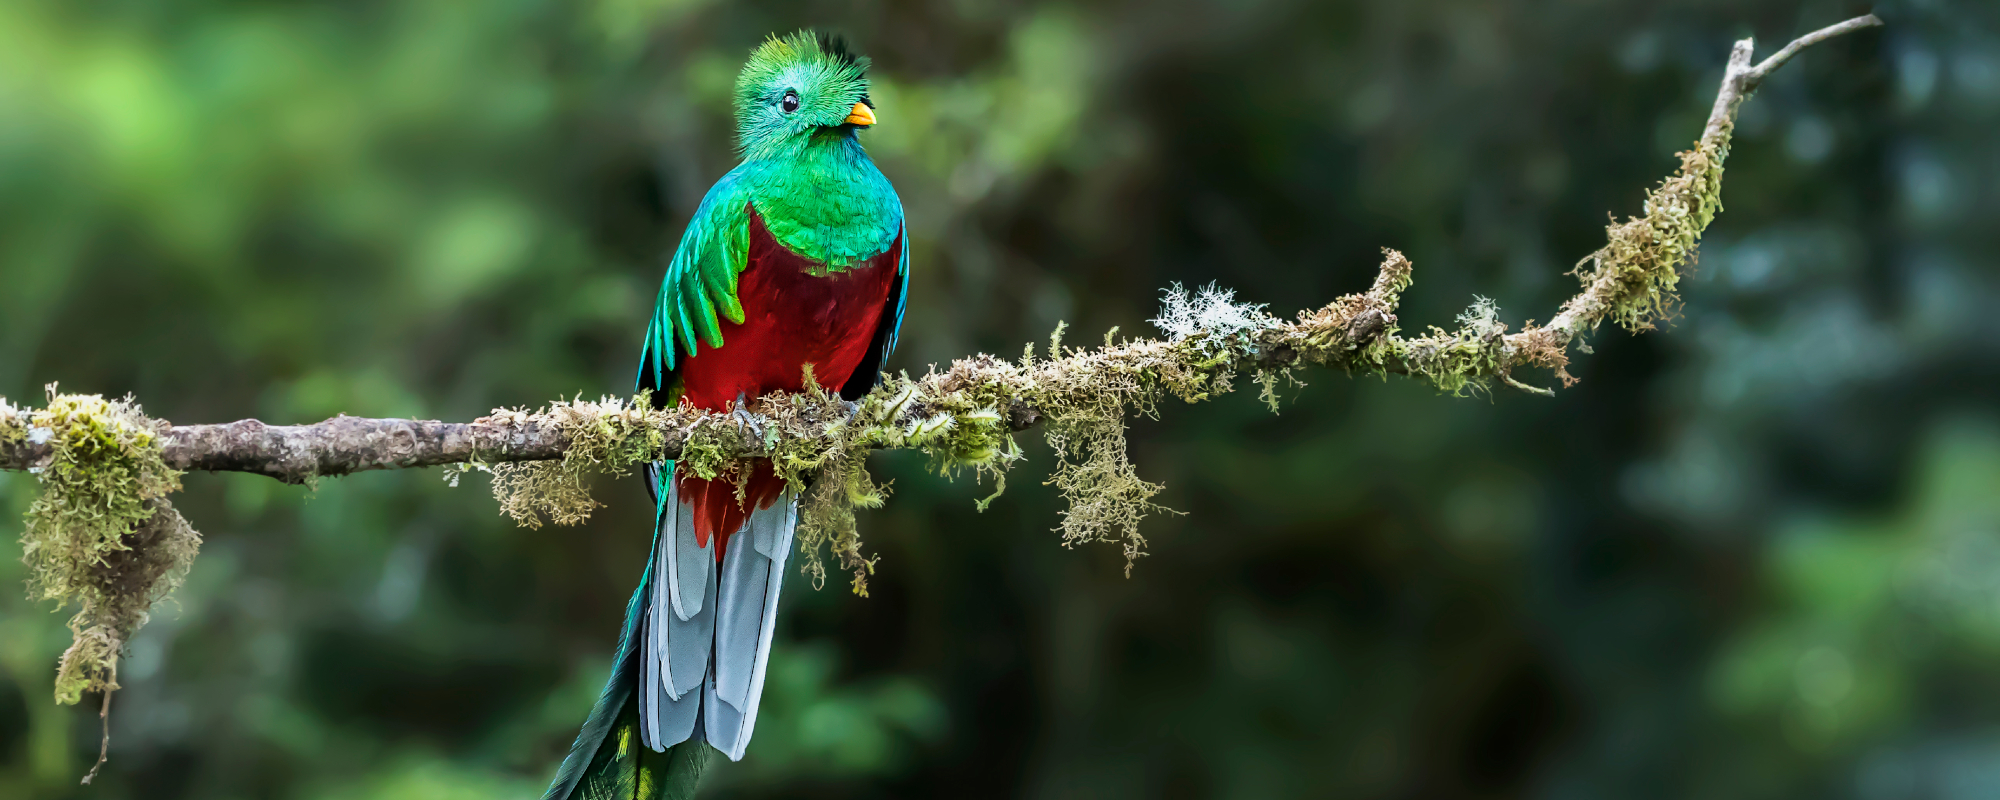 Birdwatching Packages in Costa Rica